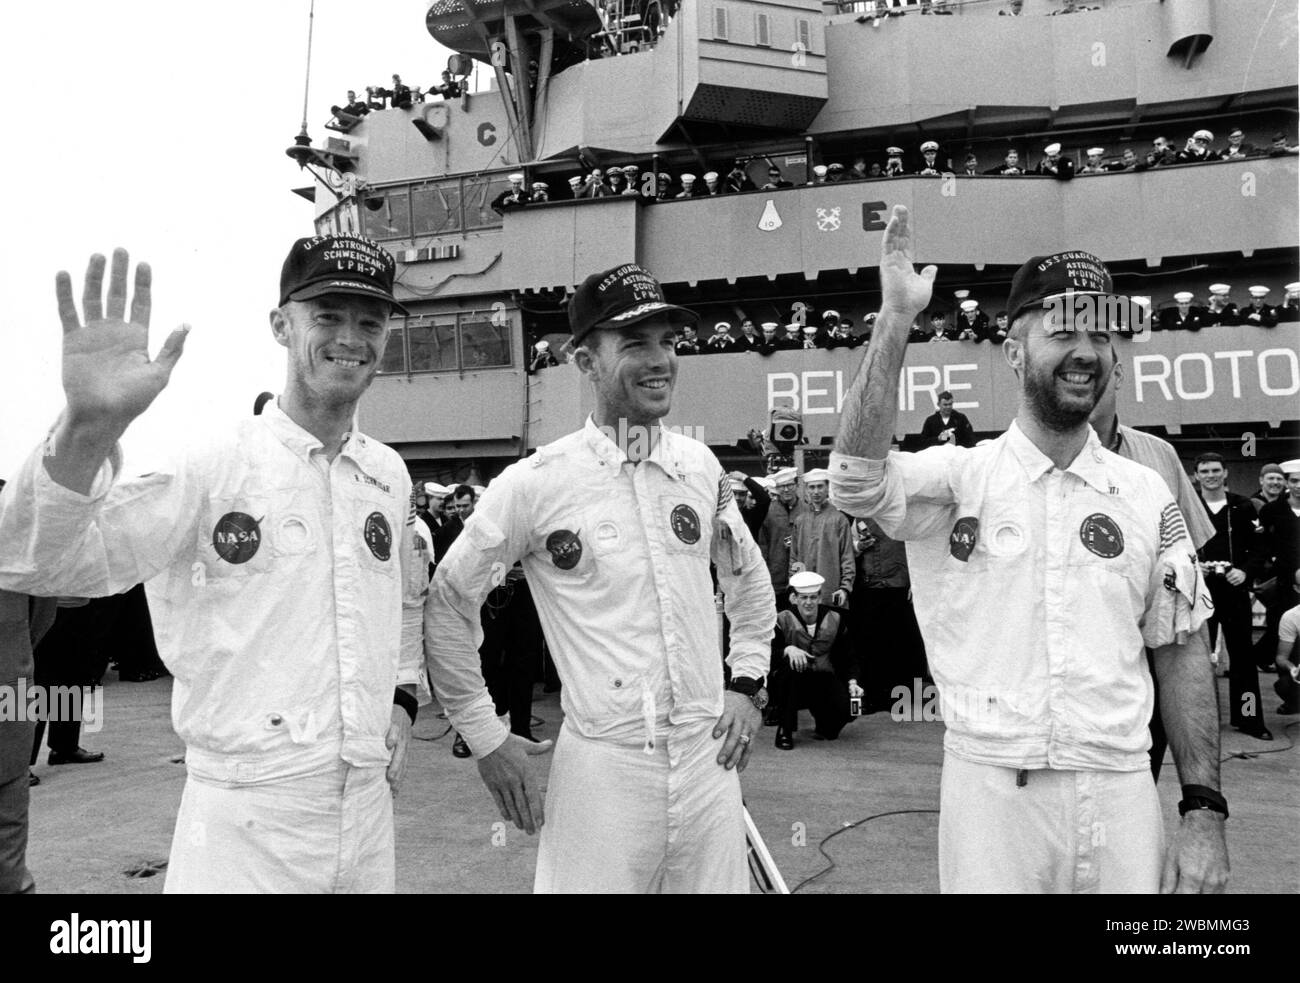 KENNEDY SPACE CENTER, FLA. -- Wearing flight caps presented to them by the crew of the USS Guadalcanal, bearded Apollo 9 astronauts (left to right) Russell L. Schweickart, David R. Scott and James A. McDivitt, wave to well-wishers aboard the recovery ship at the completion of their 10-day Earth orbital mission. Their spacecraft splashed down 780 nautical miles southeast of Cape Kennedy at 12 01 p.m. EST, March 13, 1969. During the textbook mission, the space pilots verified a lunar module spacecraft similar to the one that is to land Americans on the Moon later this year. Their flight began Ma Stock Photo